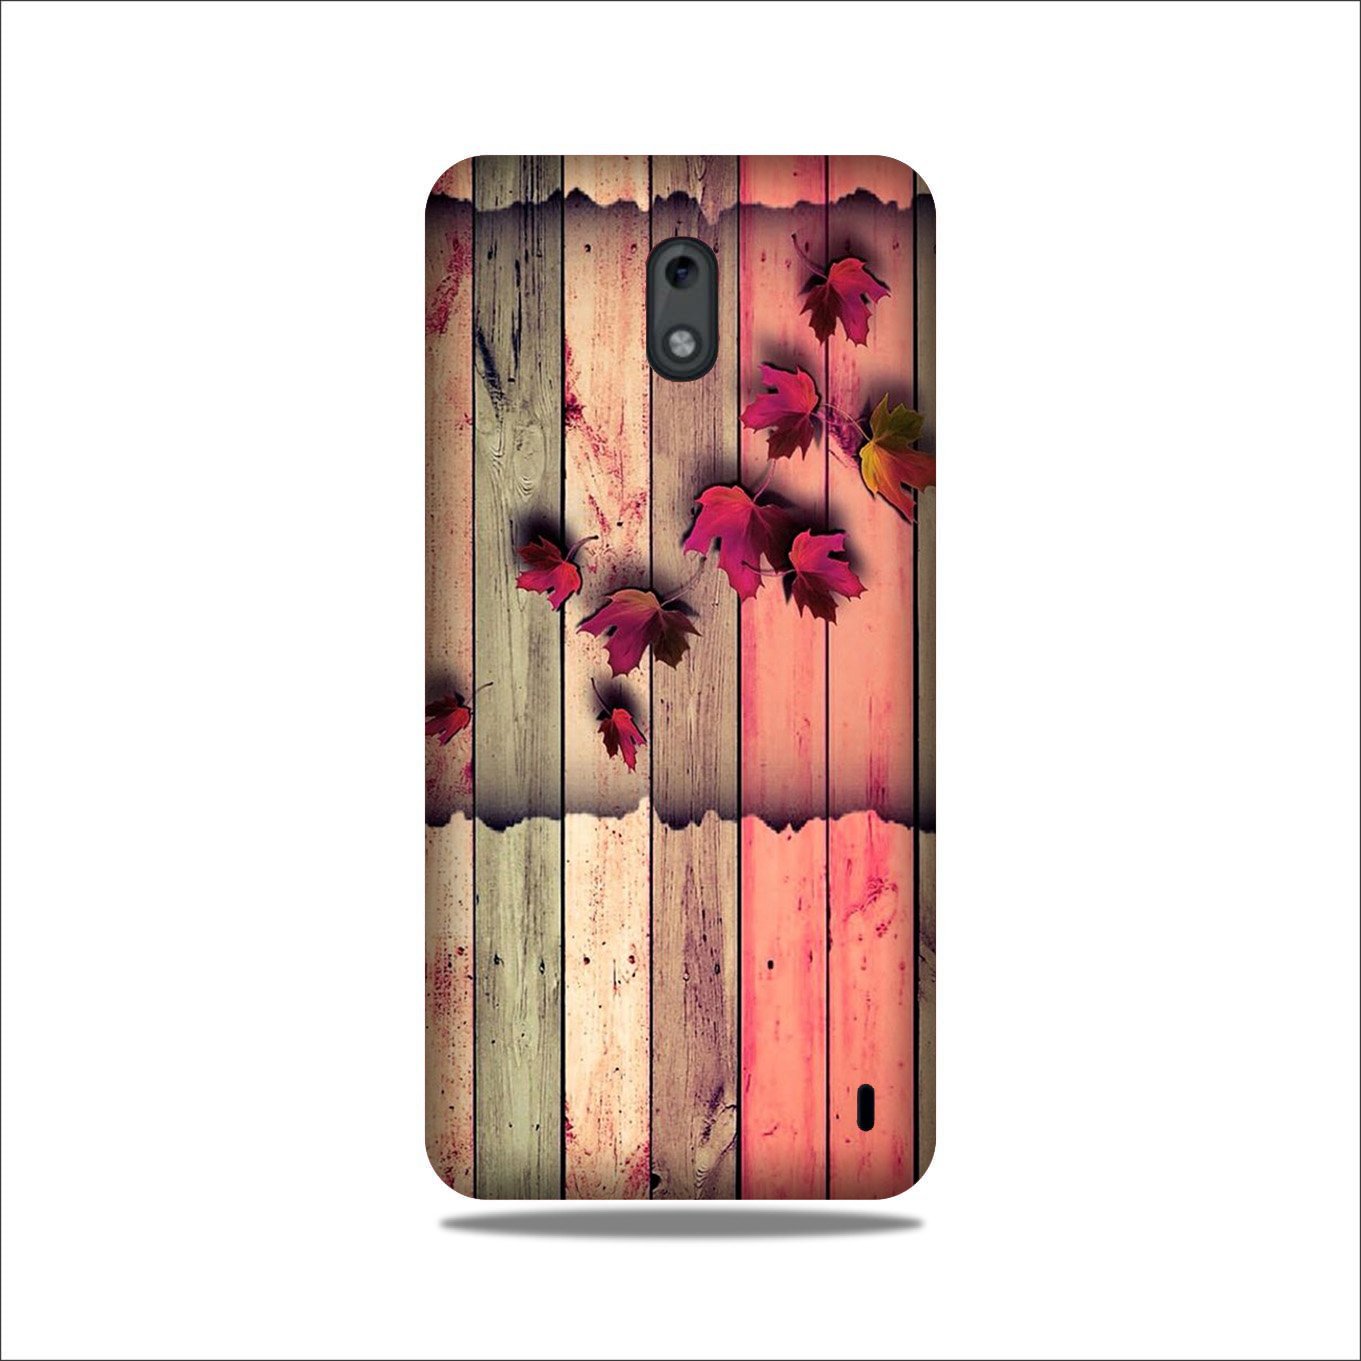 Wooden look2 Case for Nokia 2